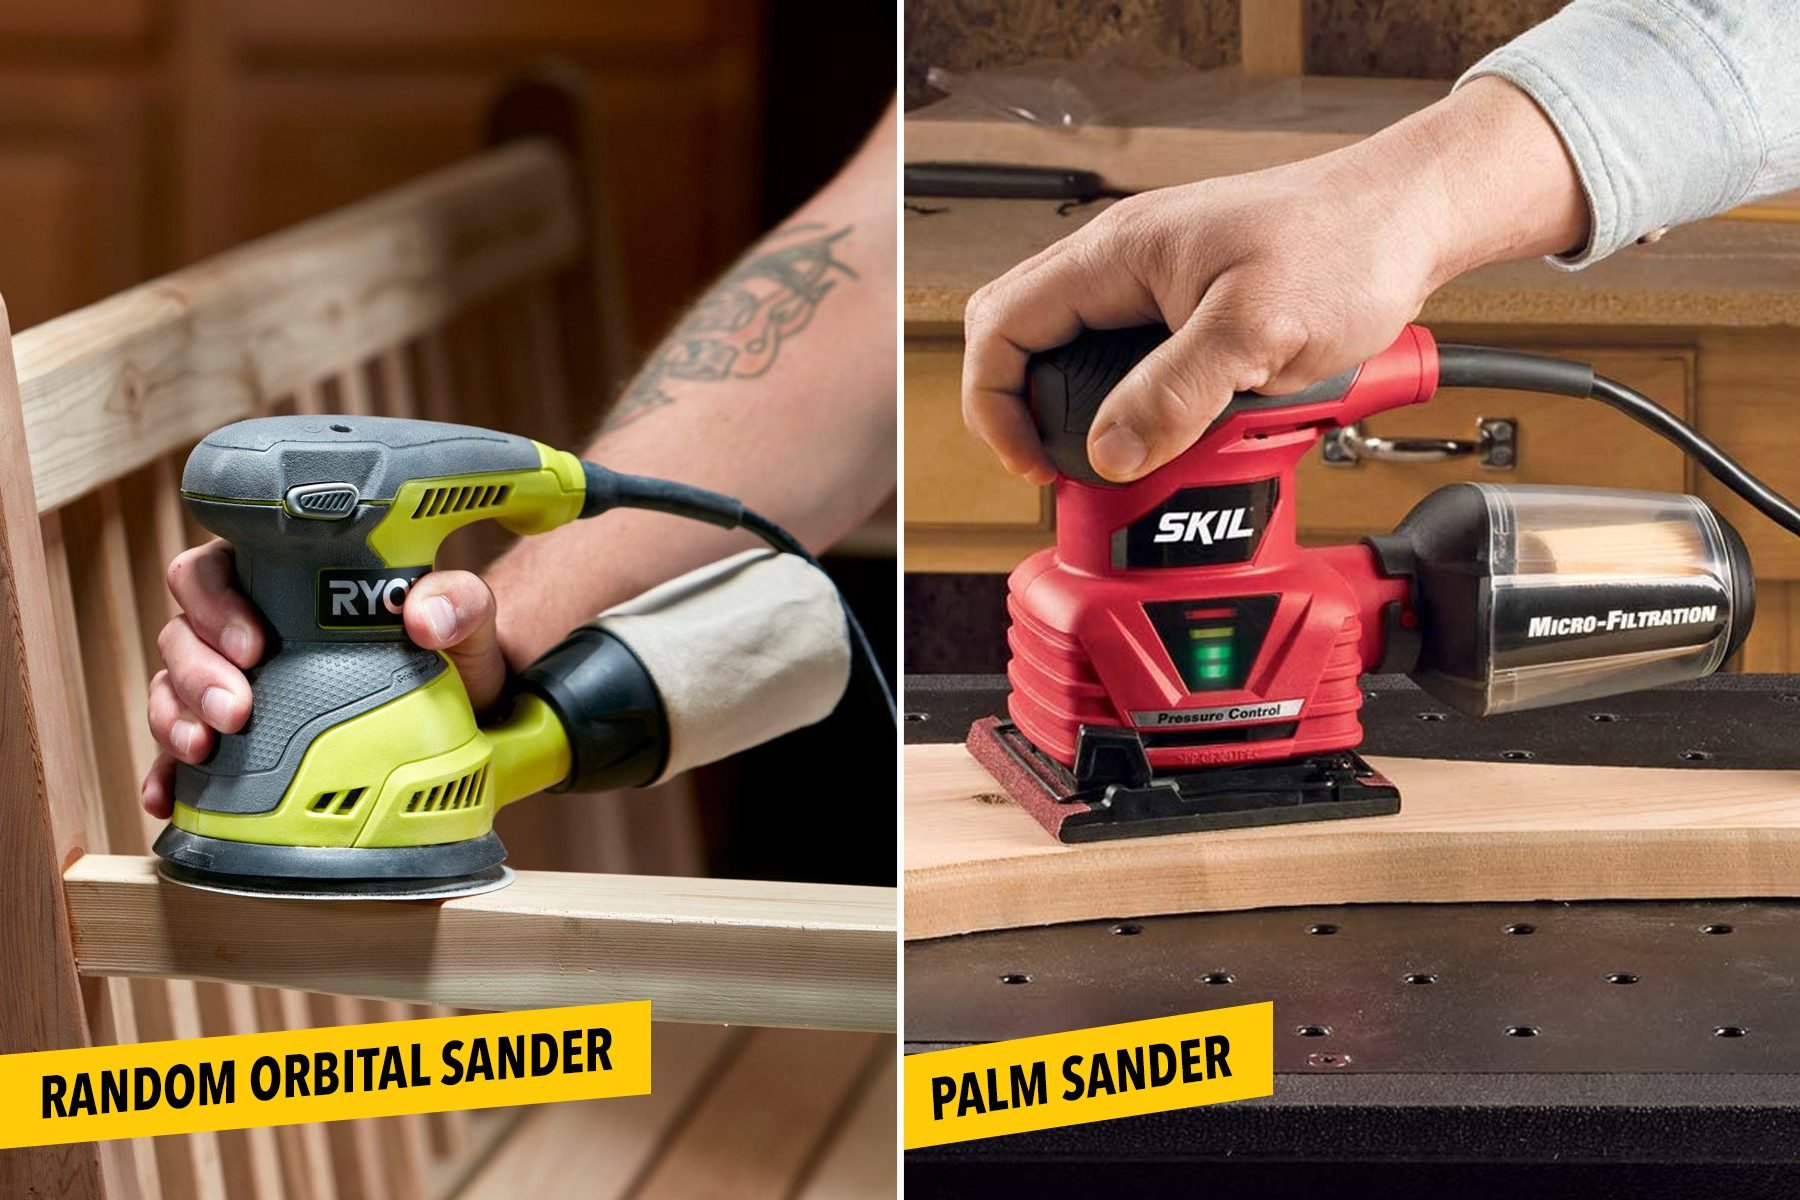 what is the difference between an orbital sander and a palm sander?